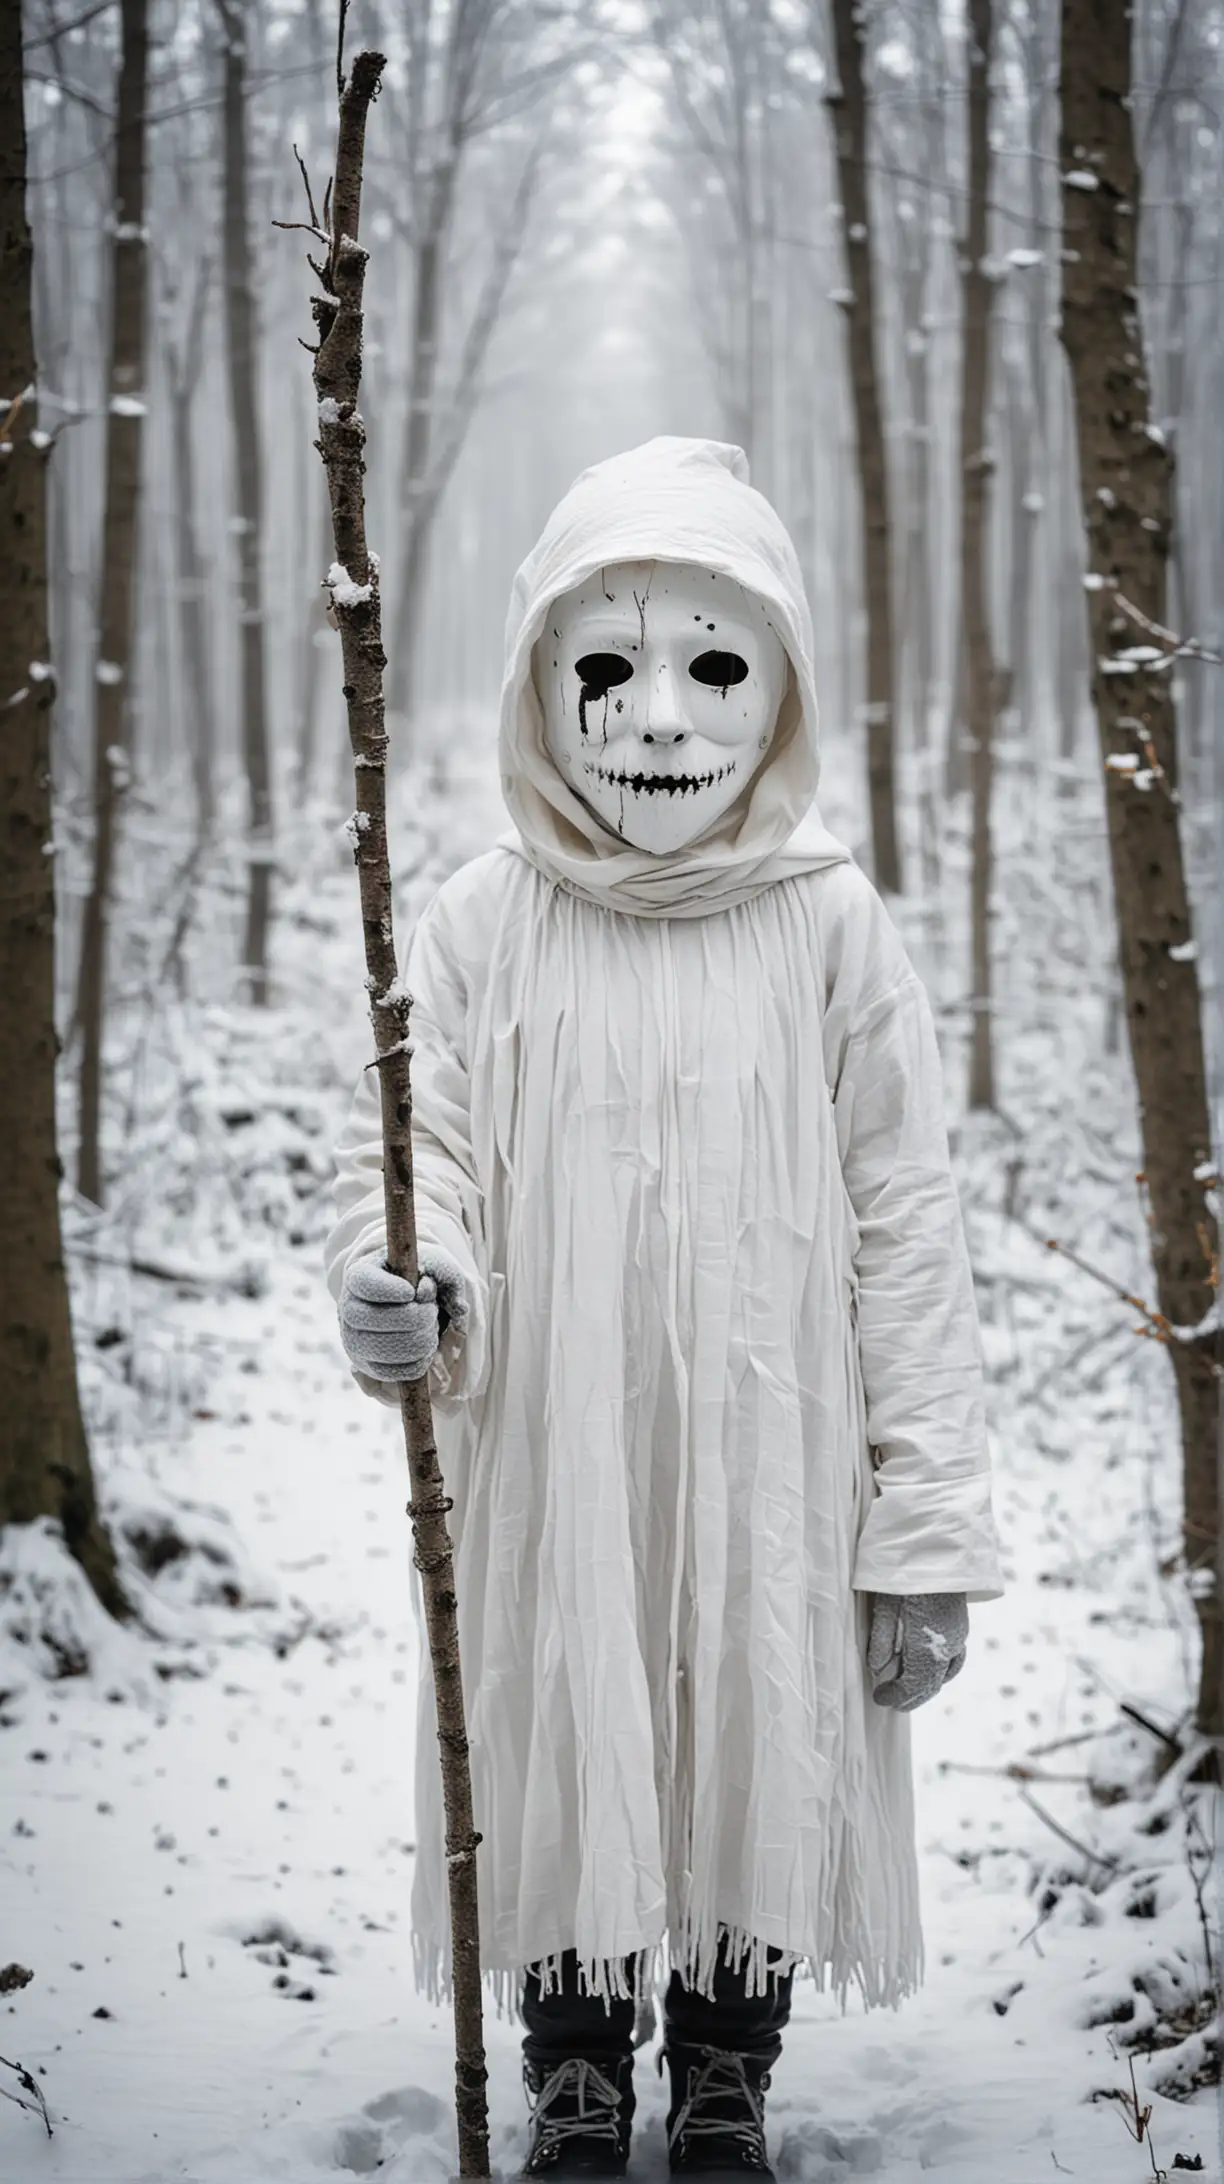 create an image inspired by a incenrraat child in a winter forest,the child is wearing a white creepy mask and is holding a stick 